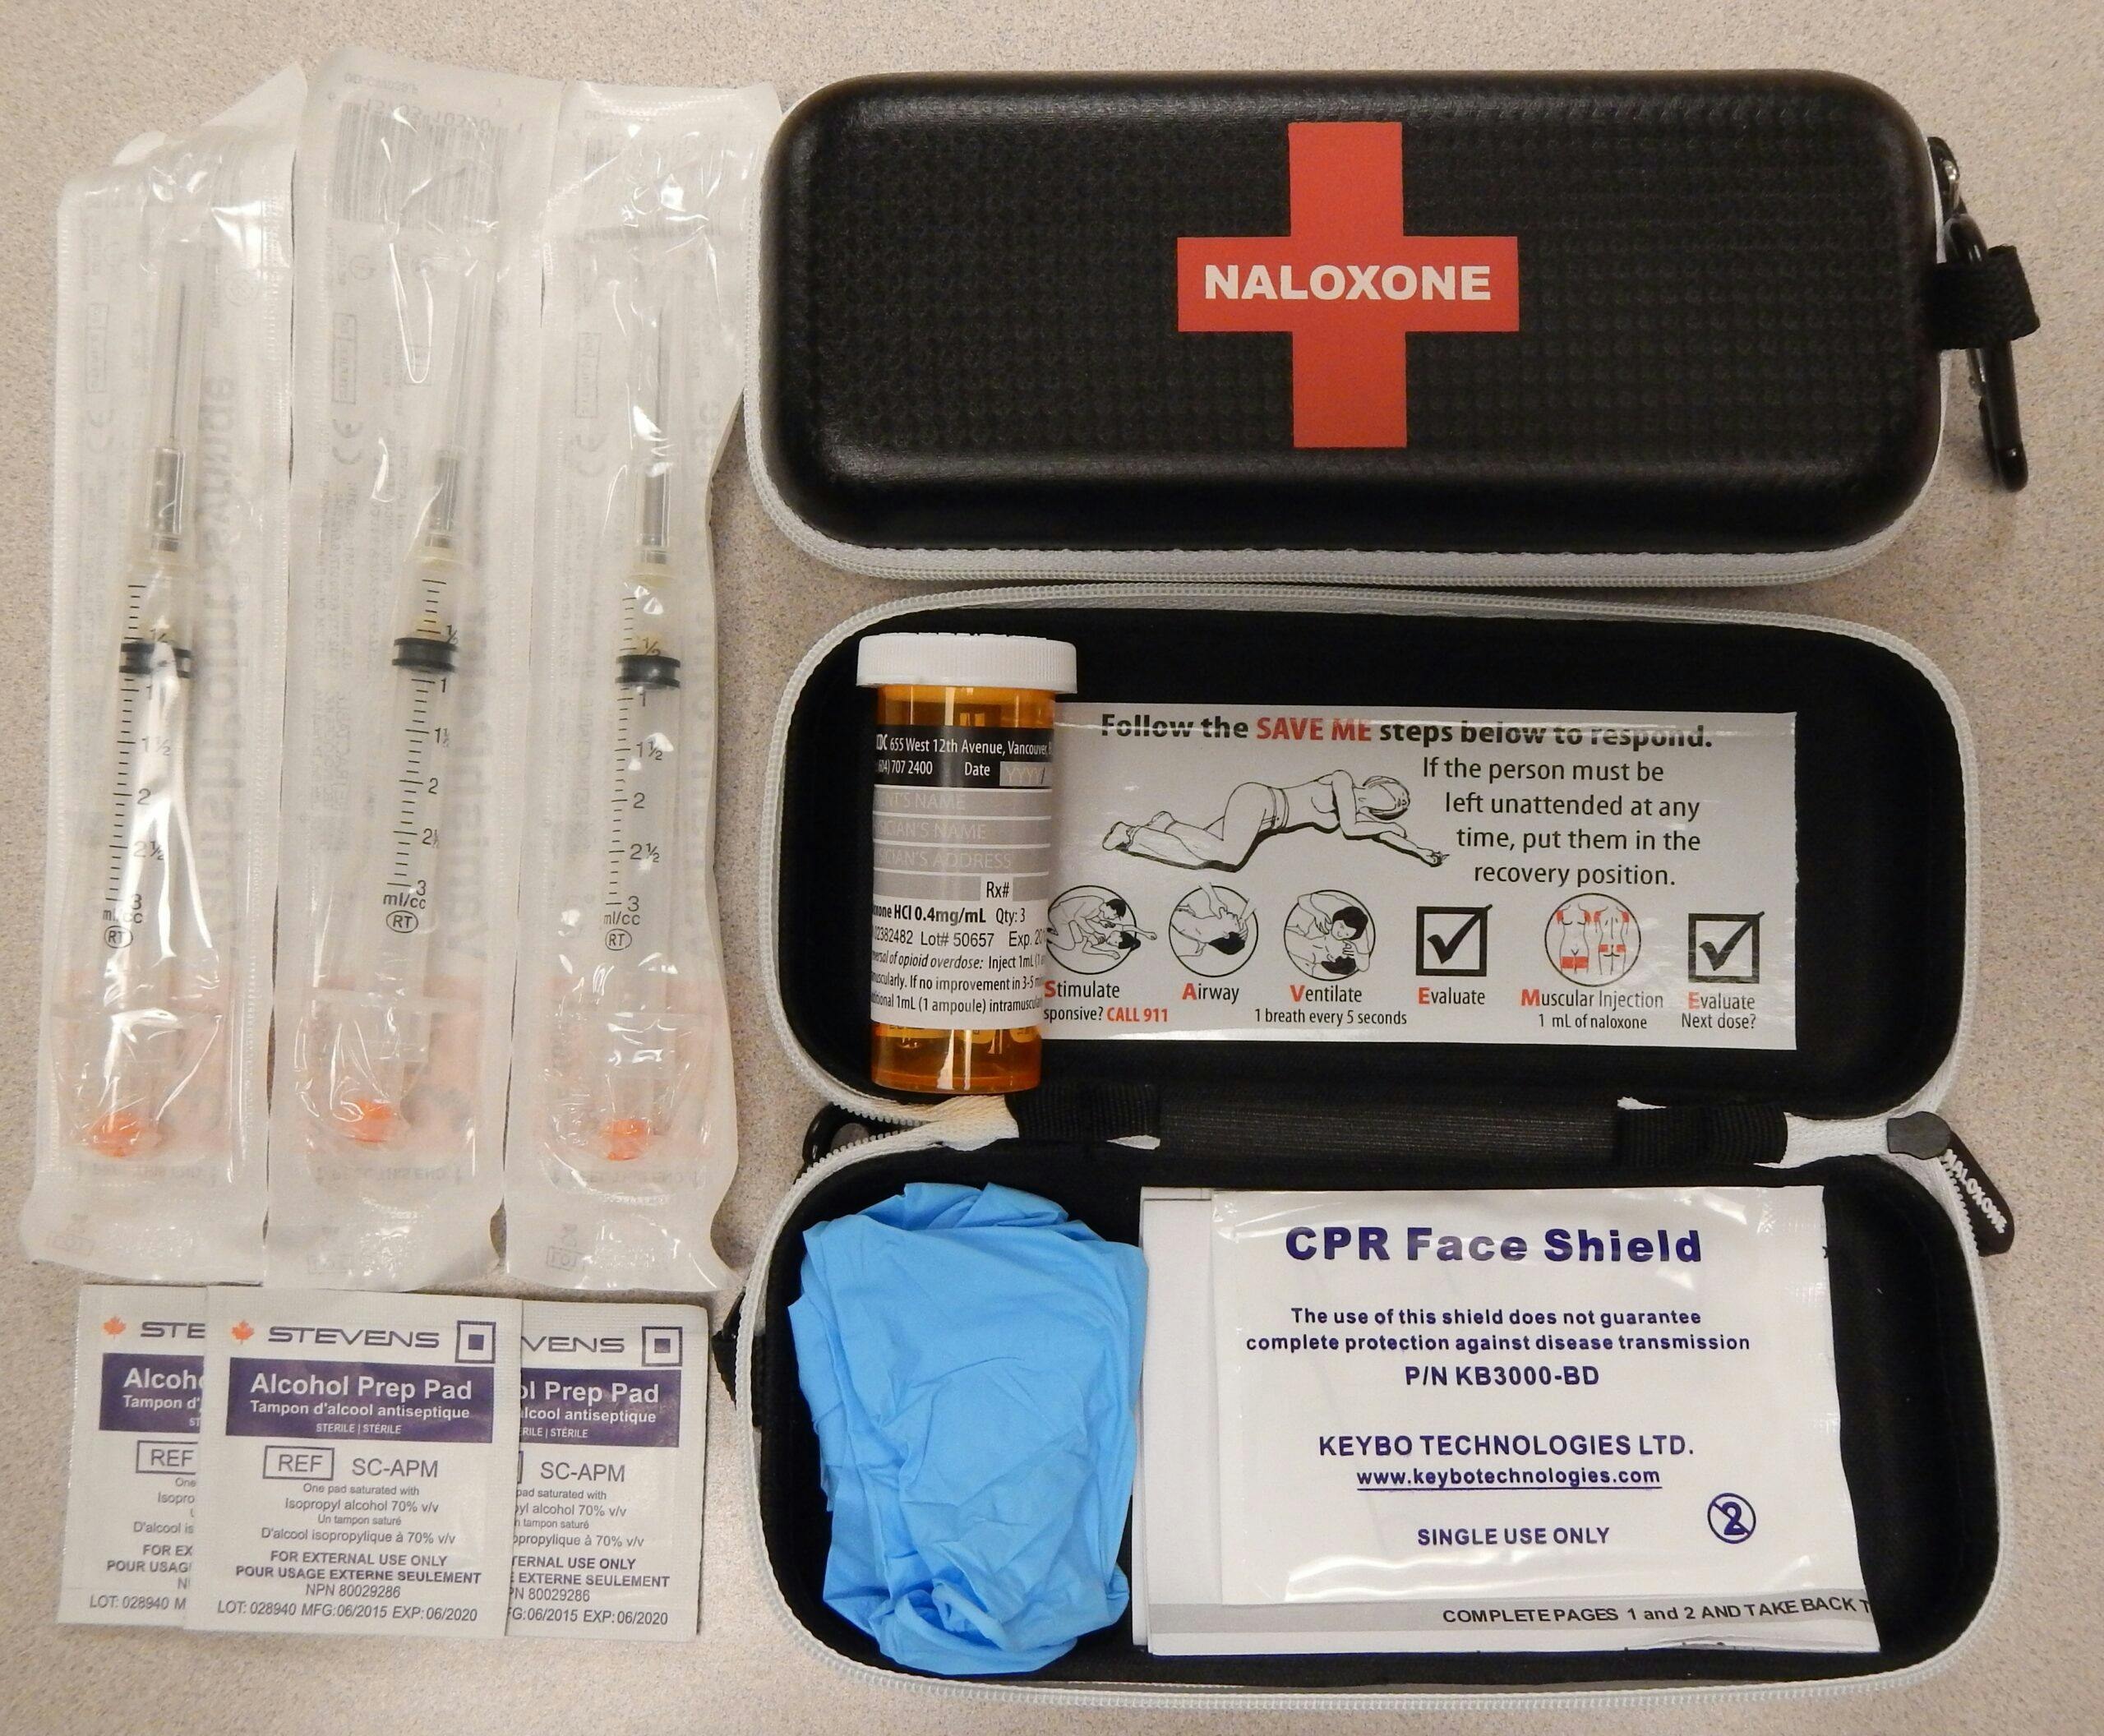 Changes to expand naloxone access through pharmacies worked, study finds